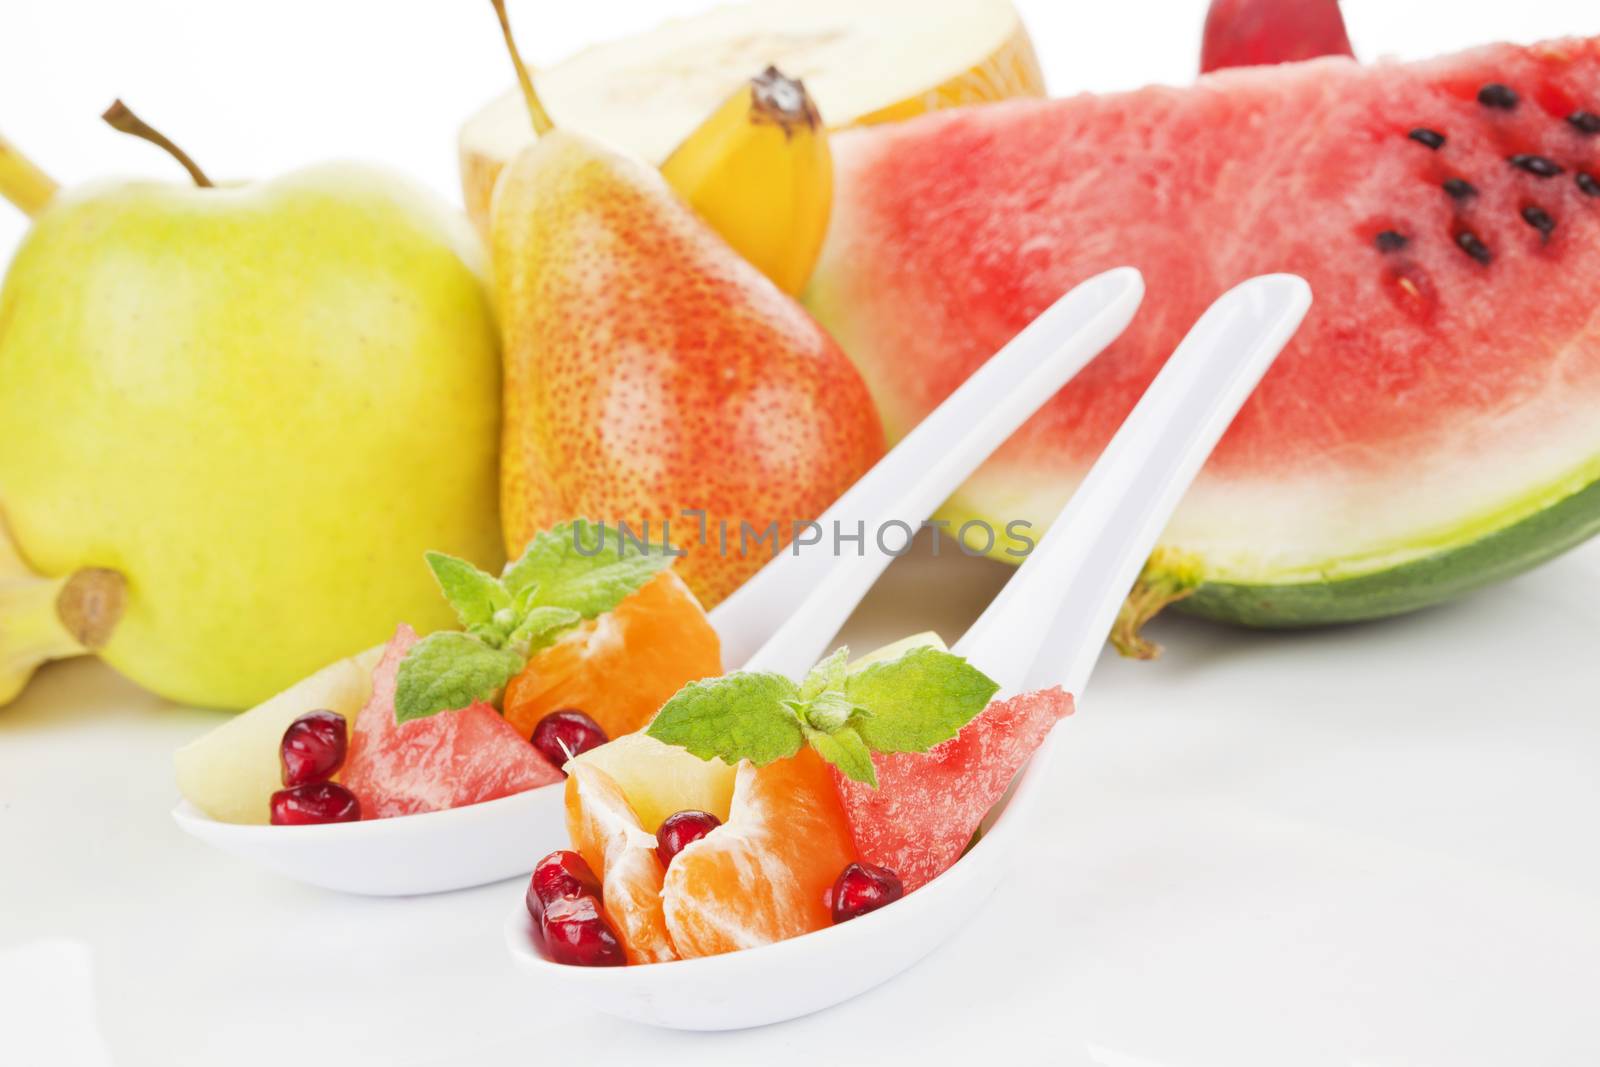 Delicious fruits pieces on white spoon. Healthy summer fruit background. Eat right, exercise regularly, die anyway. 